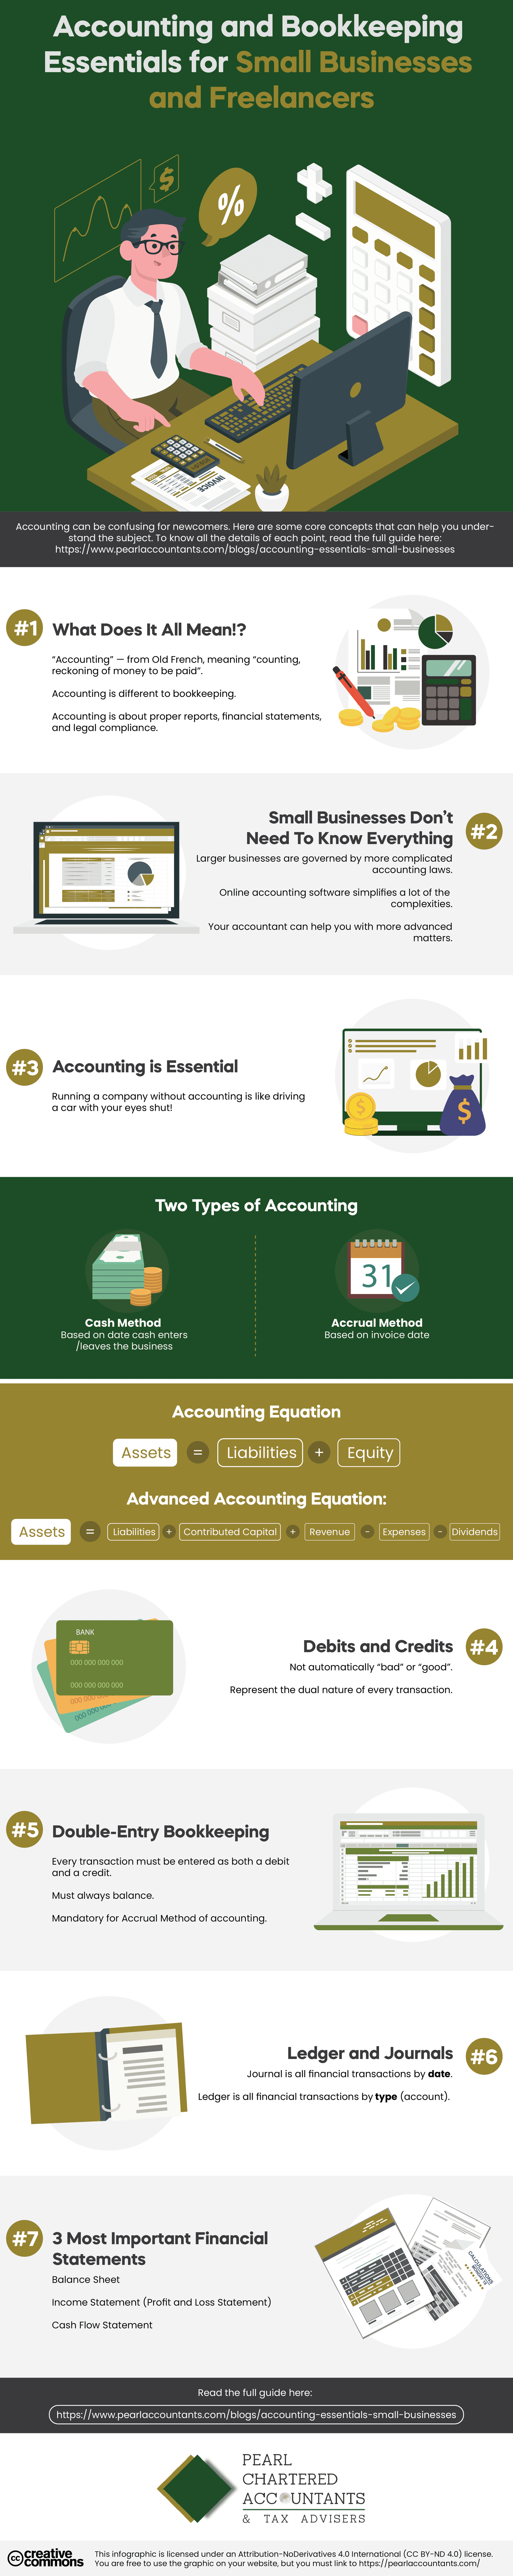 Accounting and Bookkeeping Essentials for Small Businesses and Freelancers Infographic